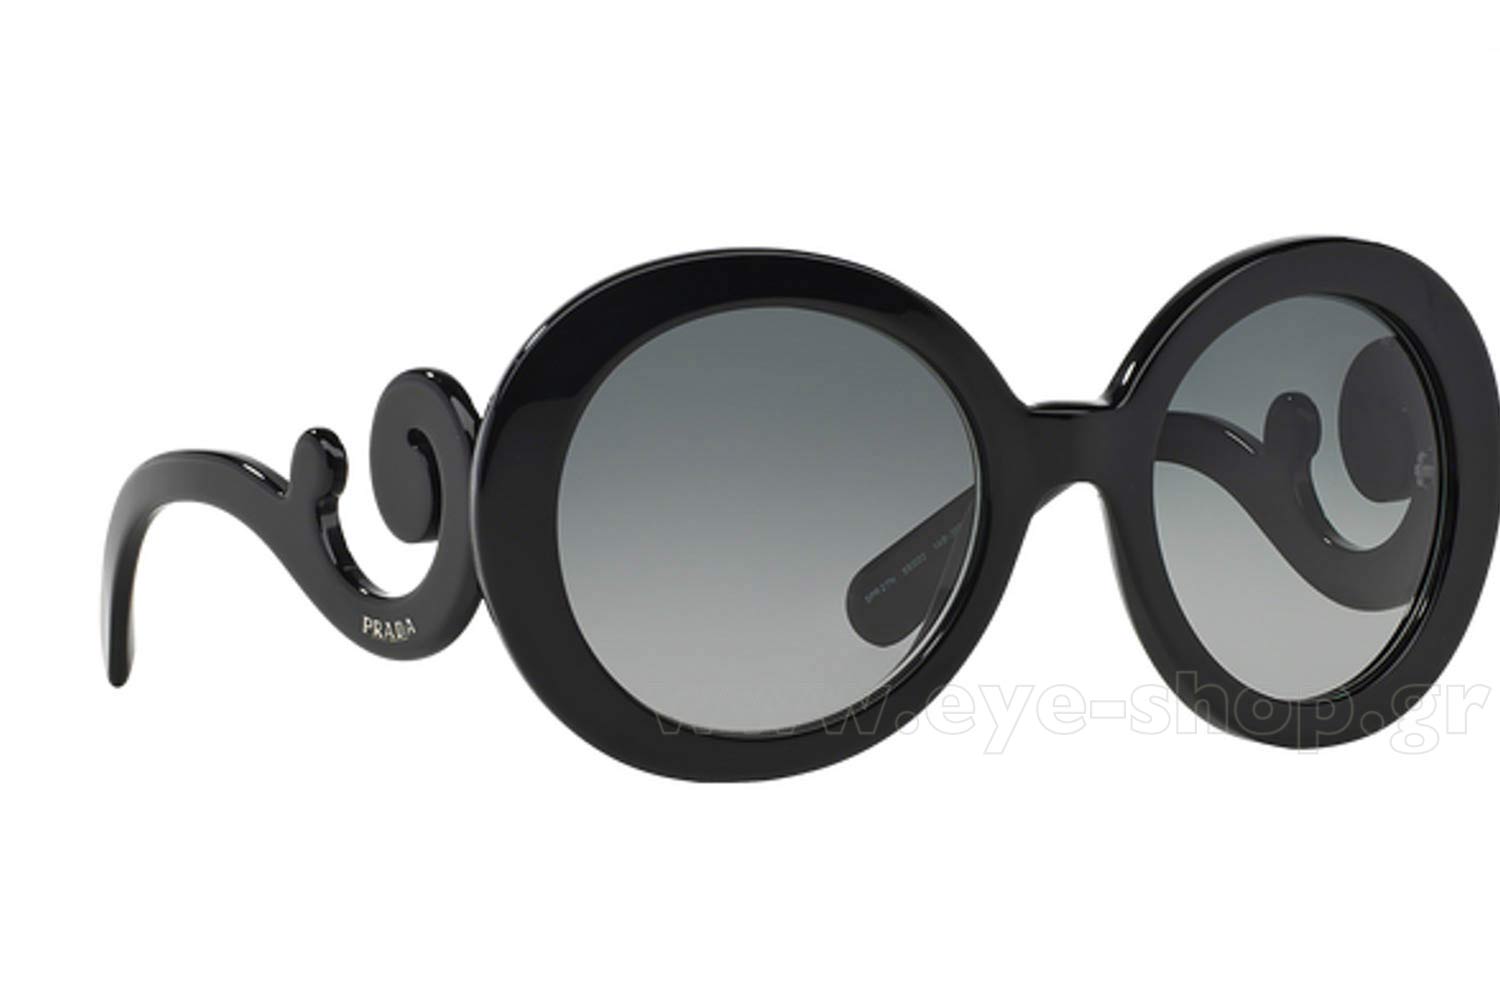 Prada Limited Edition Sunglasses Factory Sale, 57% OFF |  www.angloamericancentre.it